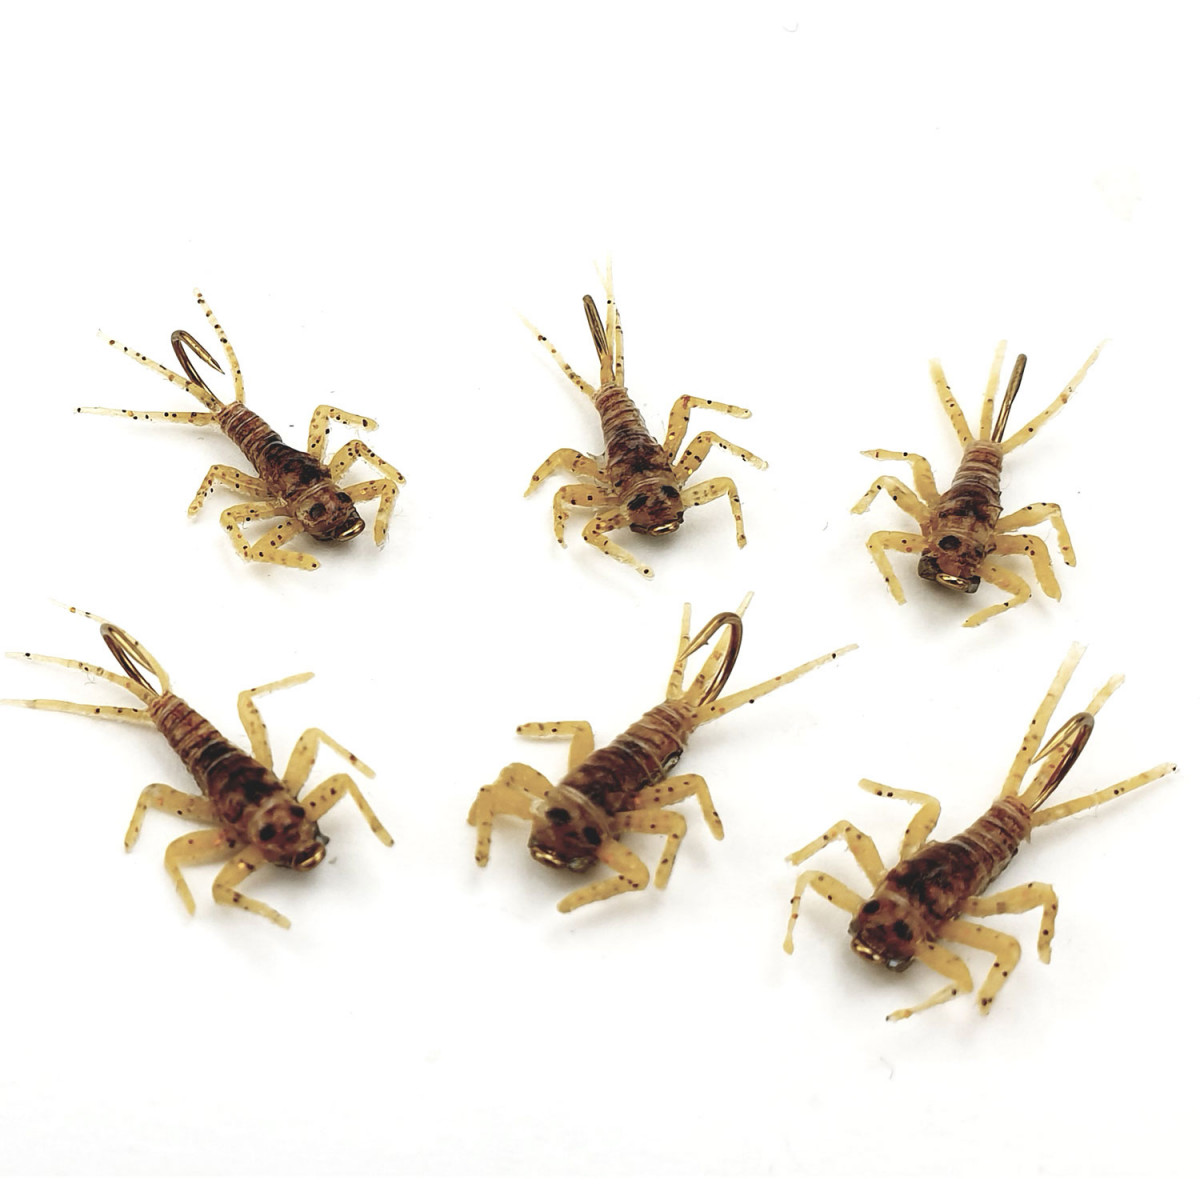 Jig Mayfly Nymph (yellow) (pack of 6)